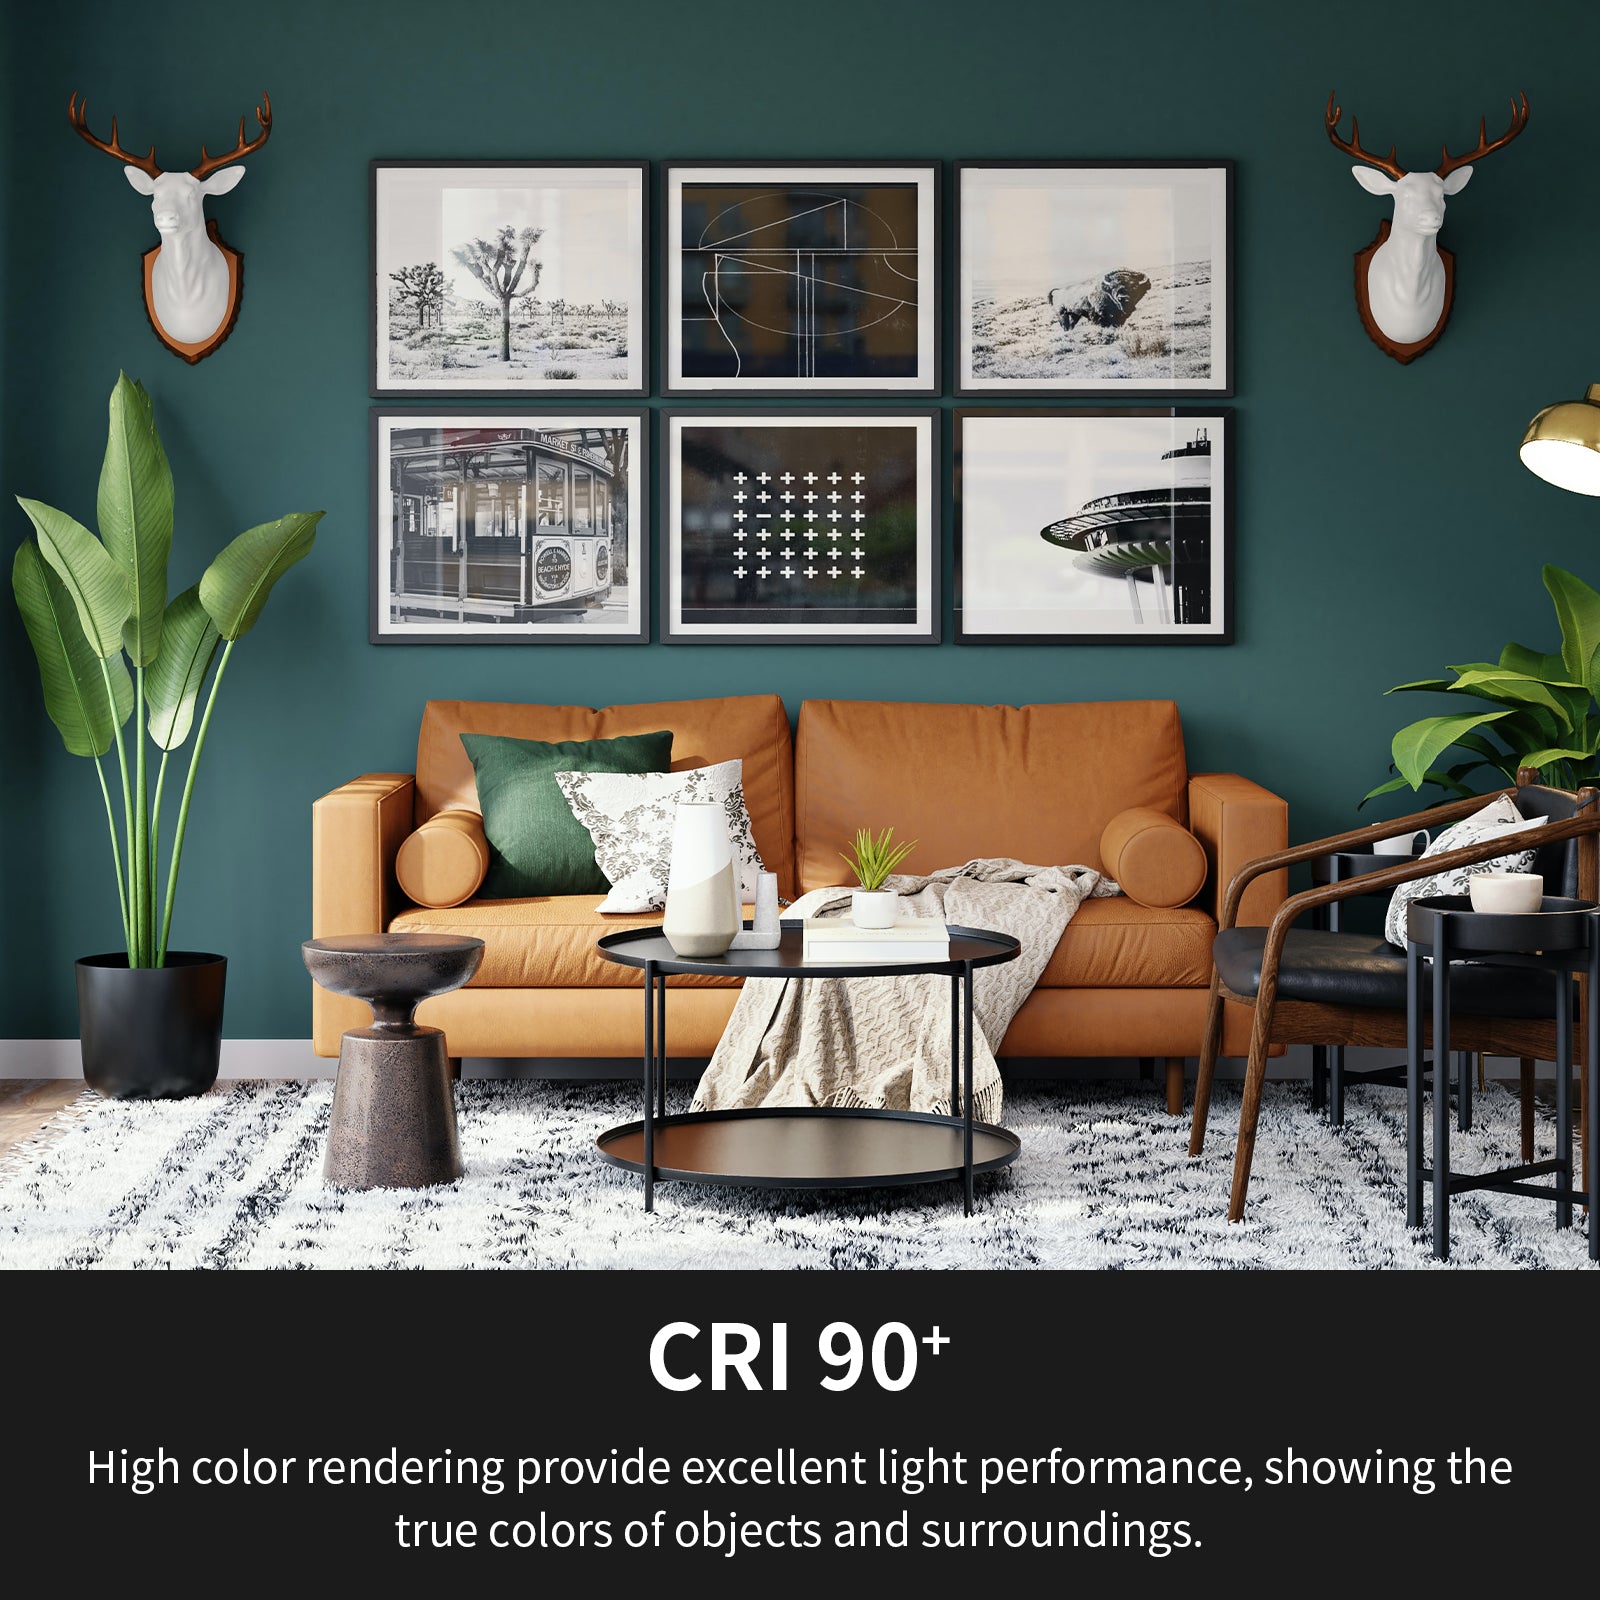 cri 90 meaning